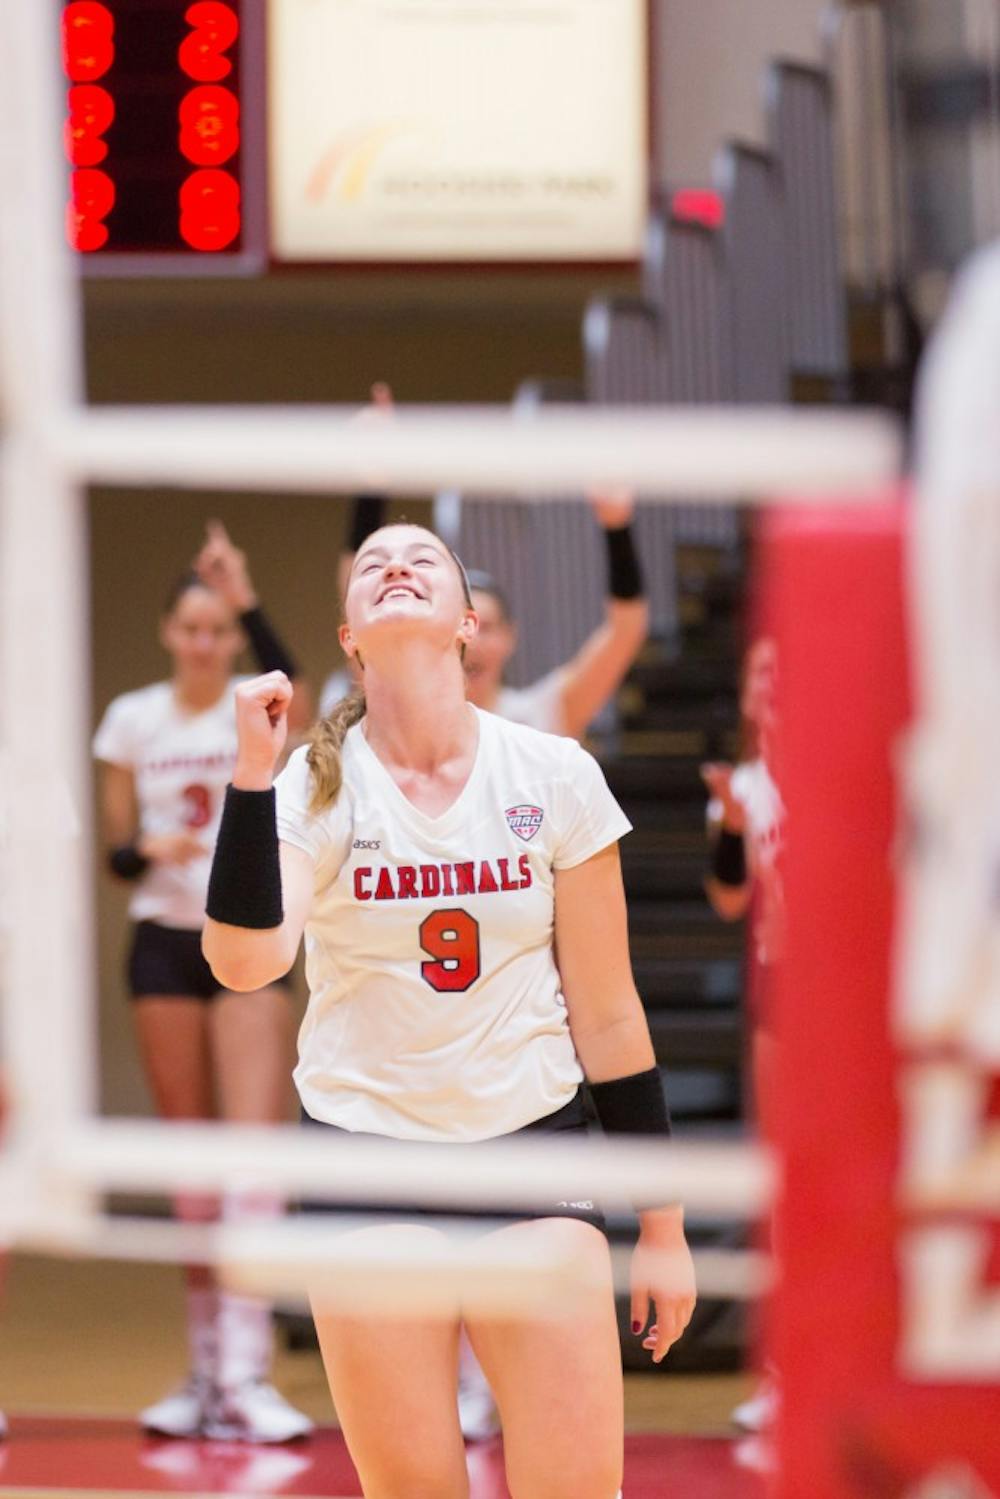 Junior outside hitter Sabrina Mangapora celebrates after a score at the game against IUPUI on Aug. 31 at John E. Worthen Arena. Kyle Crawford // DN